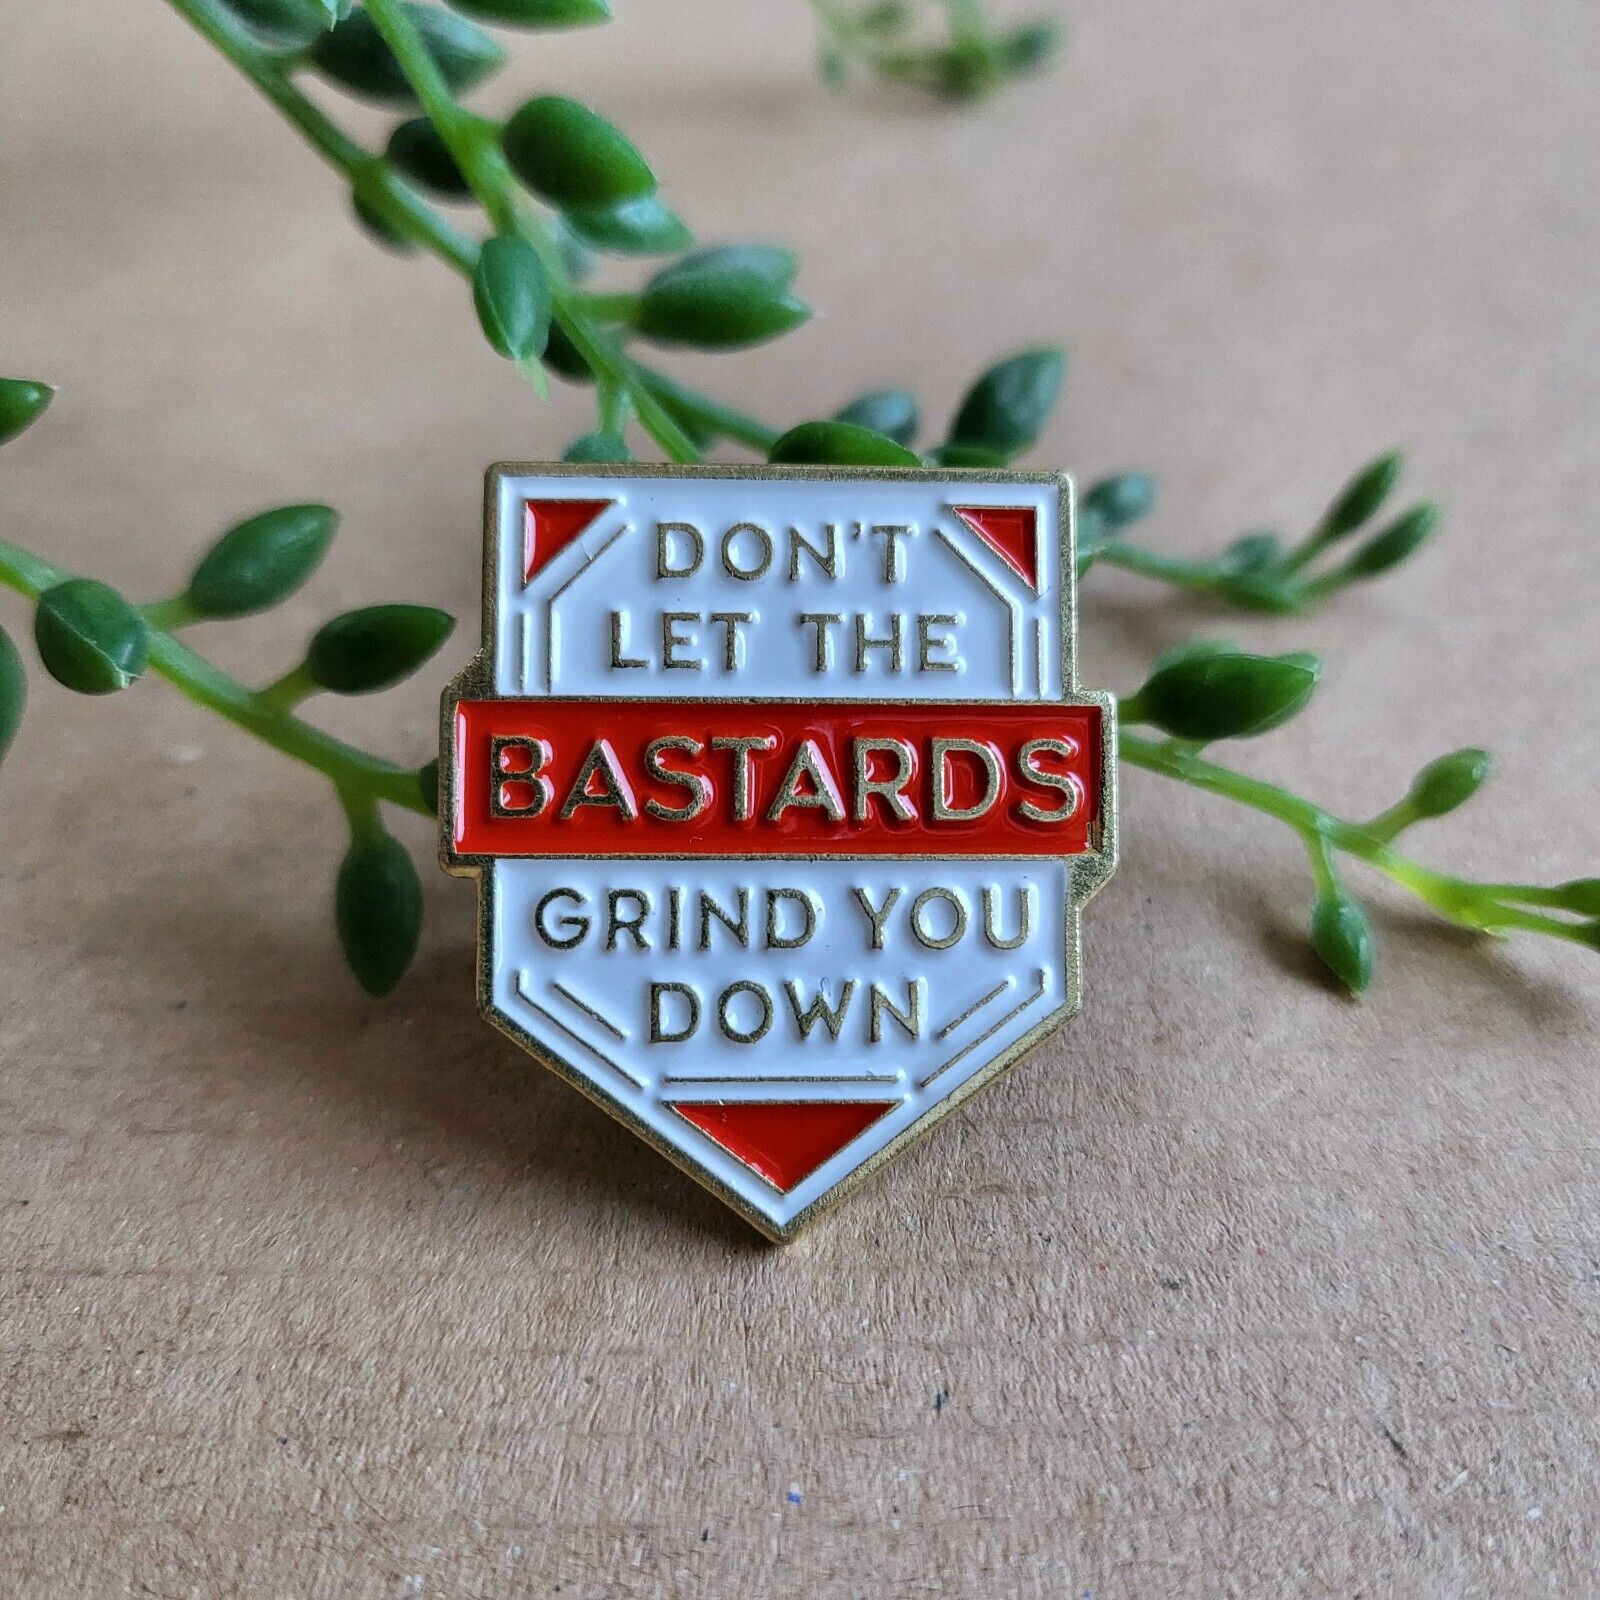 Handmaids Tale pin badge - Don\'t let the bas**rds grind you down Metal Pin Gift